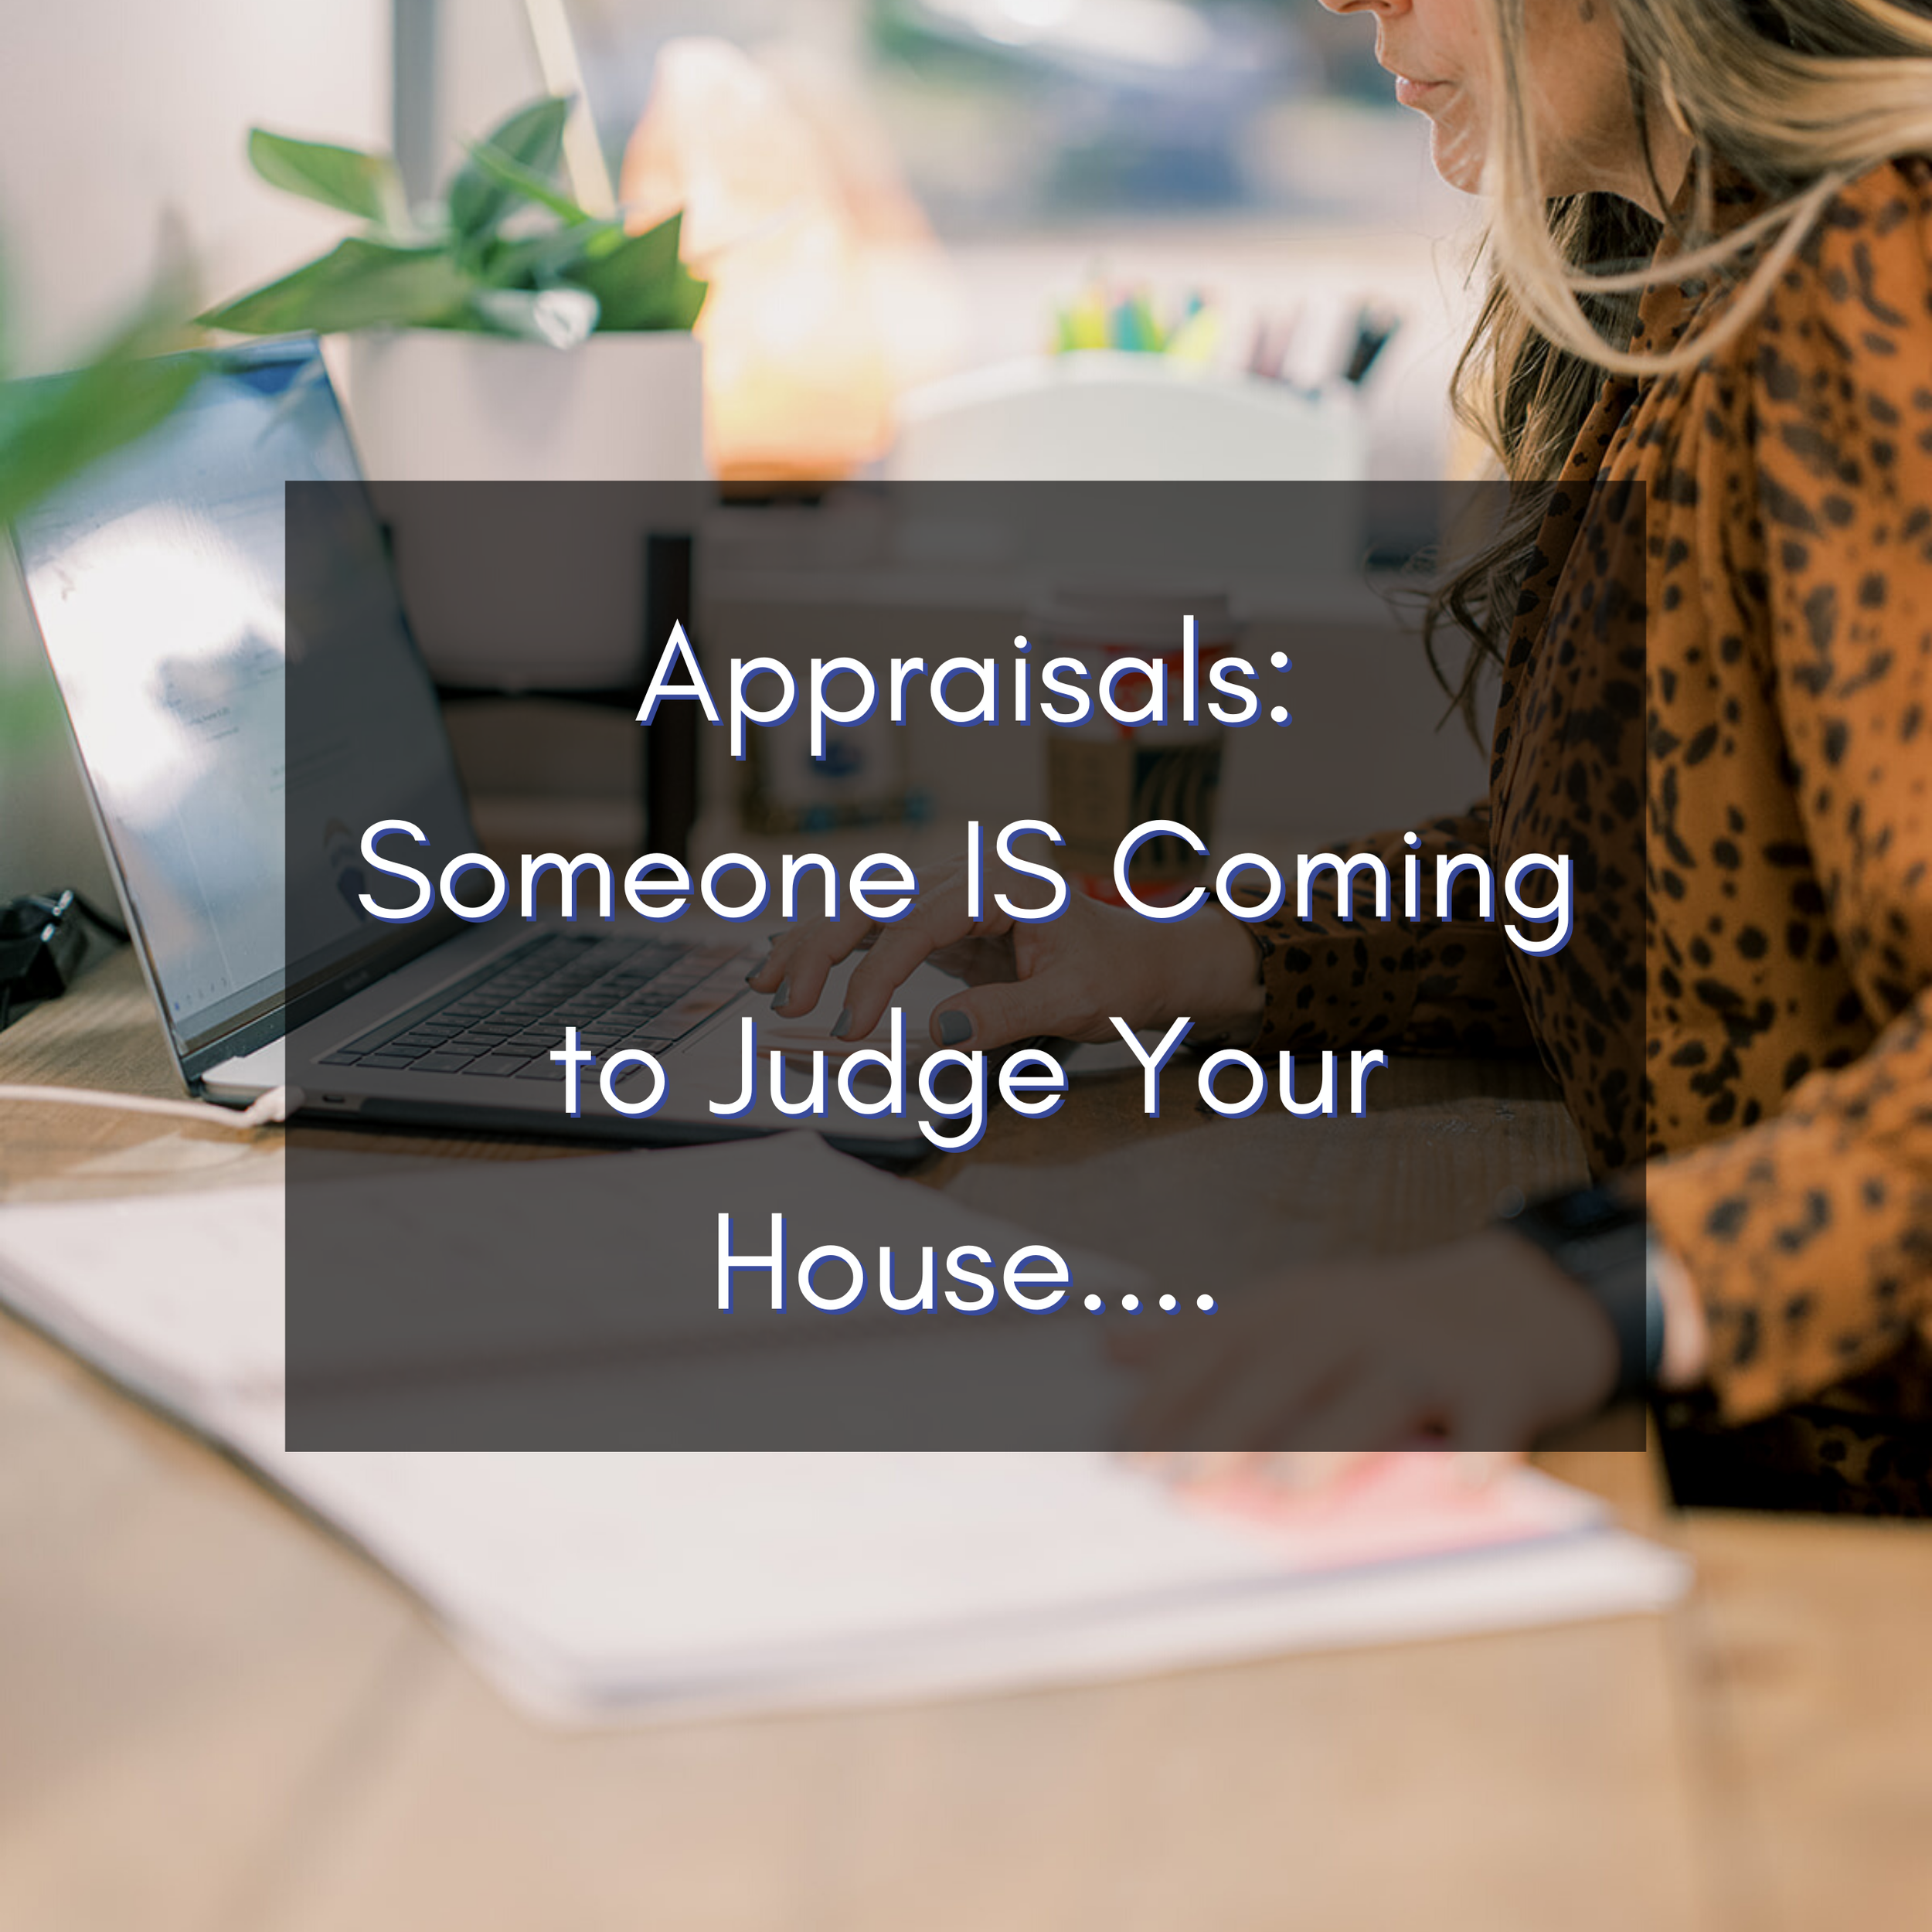 Appraisals: Someone IS Coming to Judge Your House....